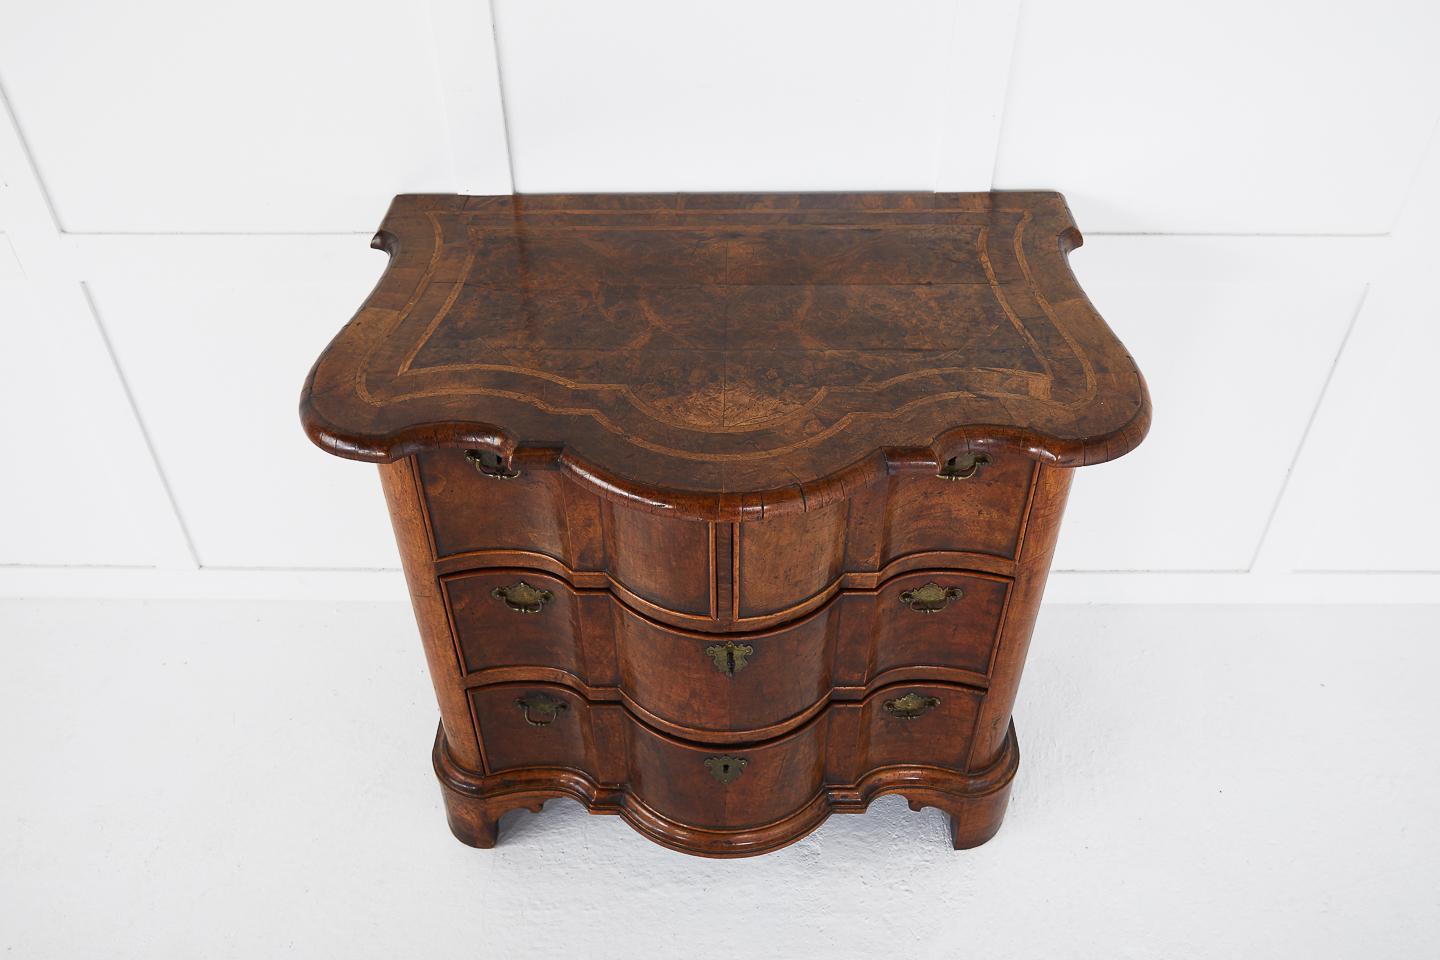 Late 19th Century Dutch burr walnut serpentine feather banded commode of small proportion. Having a nice colour, original handles and stands on shaped and curved bracket feet.
Dimensions:
H 75cm x W 87cm x D 58cm
H 29¾